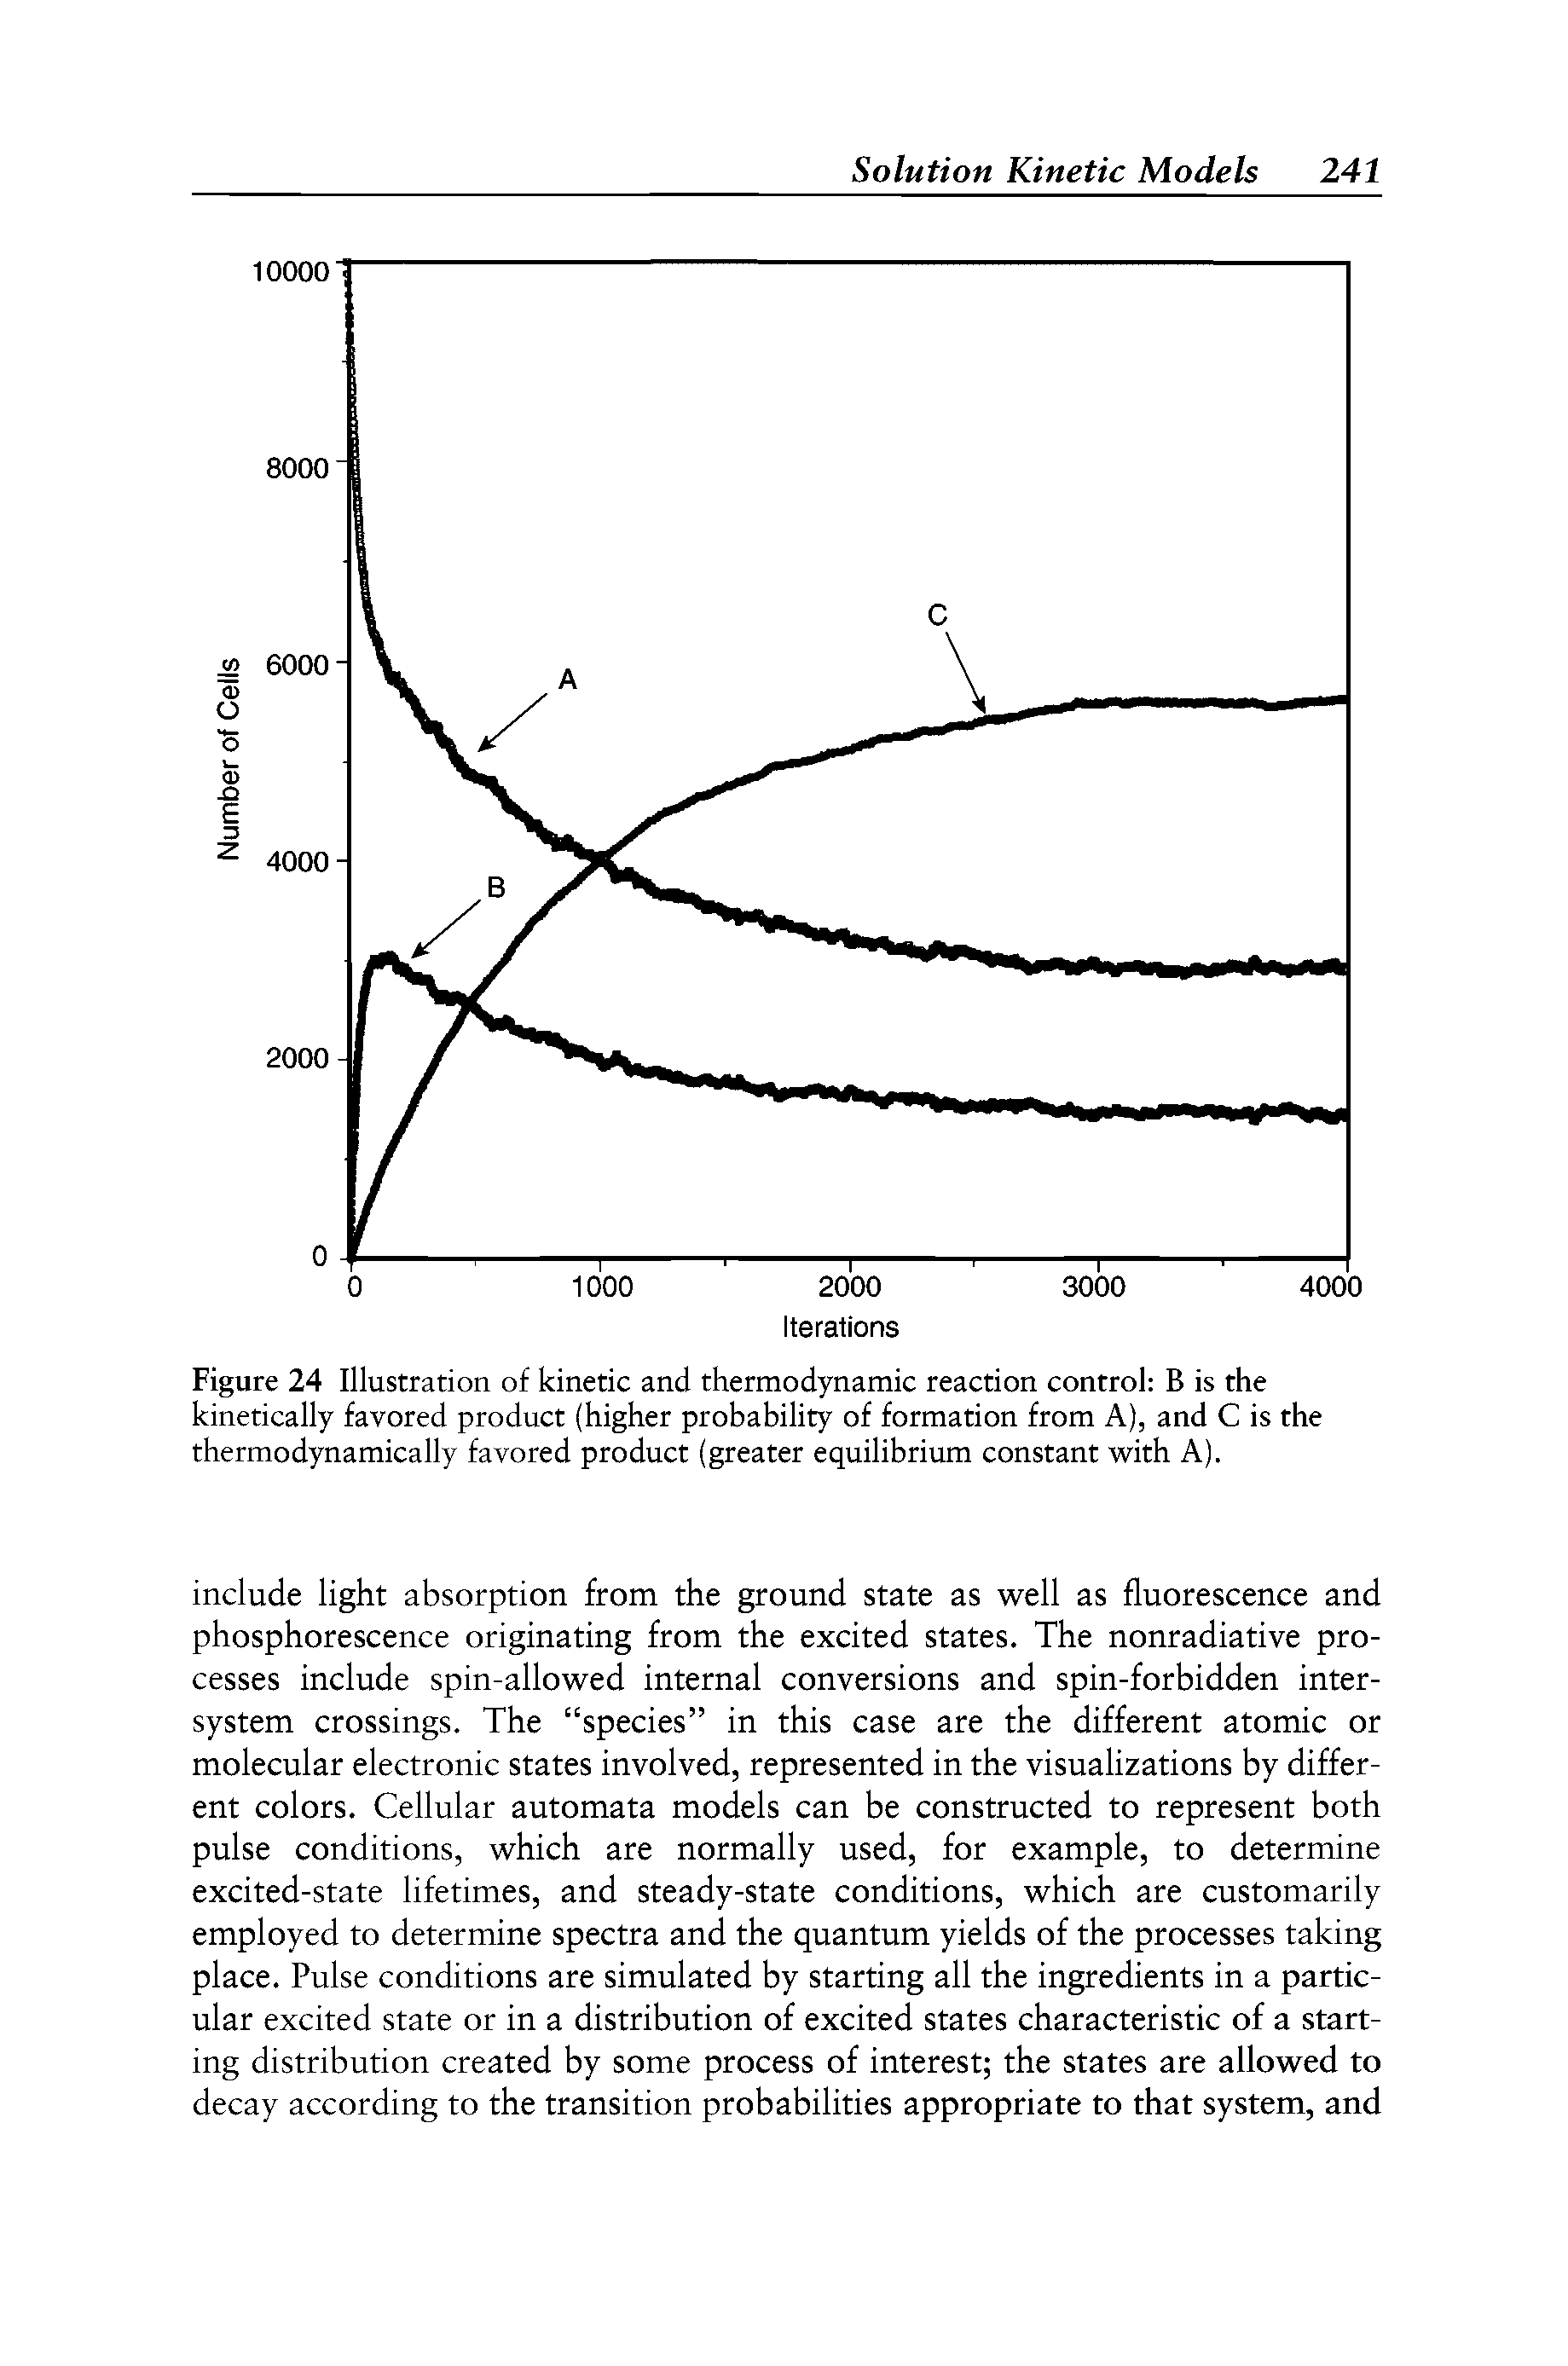 Figure 24 Illustration of kinetic and thermodynamic reaction control B is the kinetically favored product (higher probability of formation from A), and C is the thermodynamically favored product (greater equilibrium constant with A).